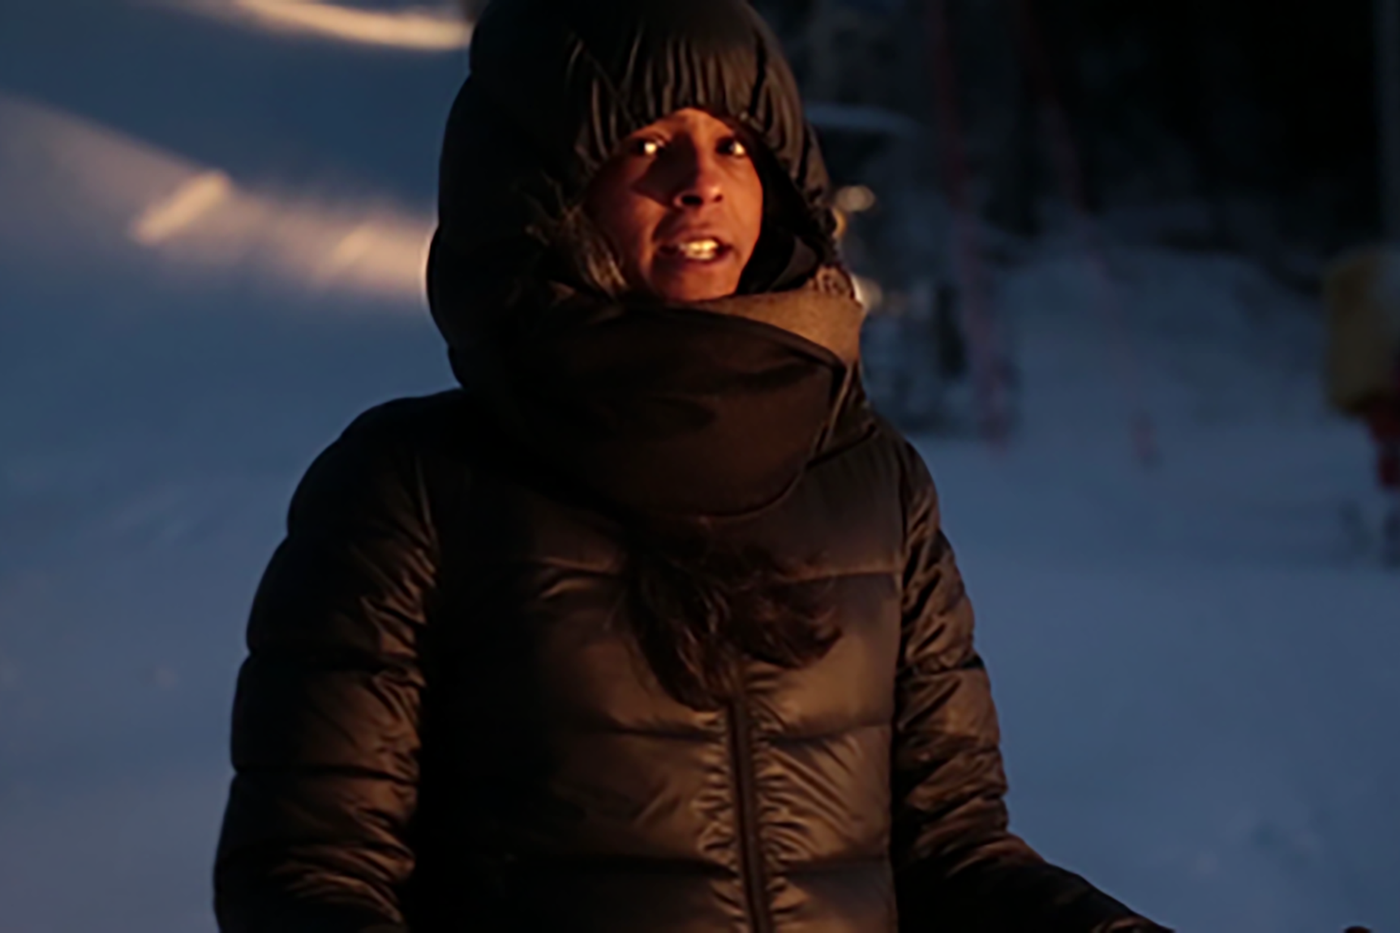 Video still. A person wearing a black down winter jacket and hood looks just past the camera with slightly open mouth and wide open eyes, in the background white landscape, probably snow-covered.